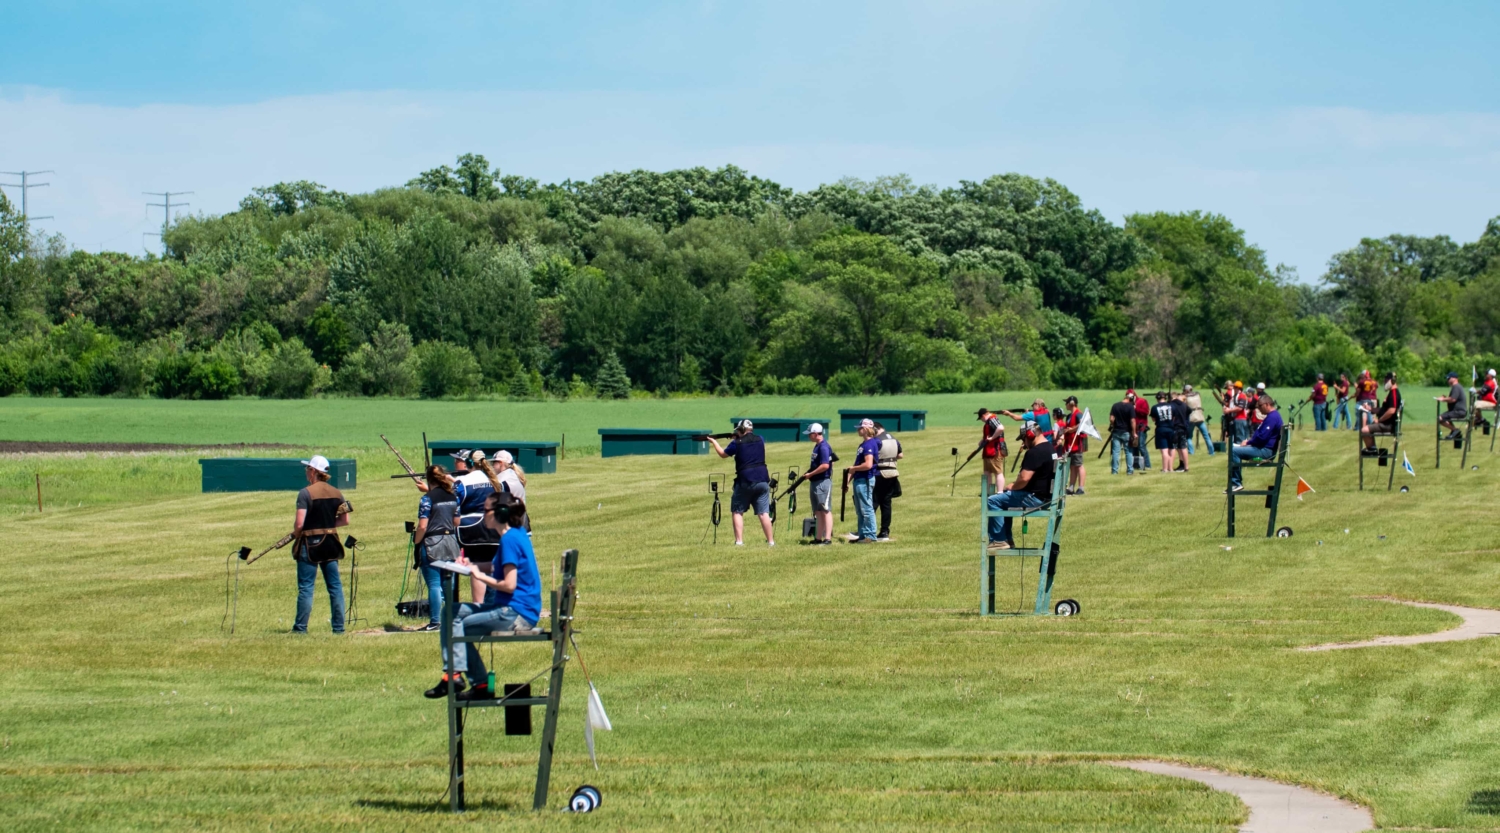 A group of people standing in a shooting range ready to shoot.